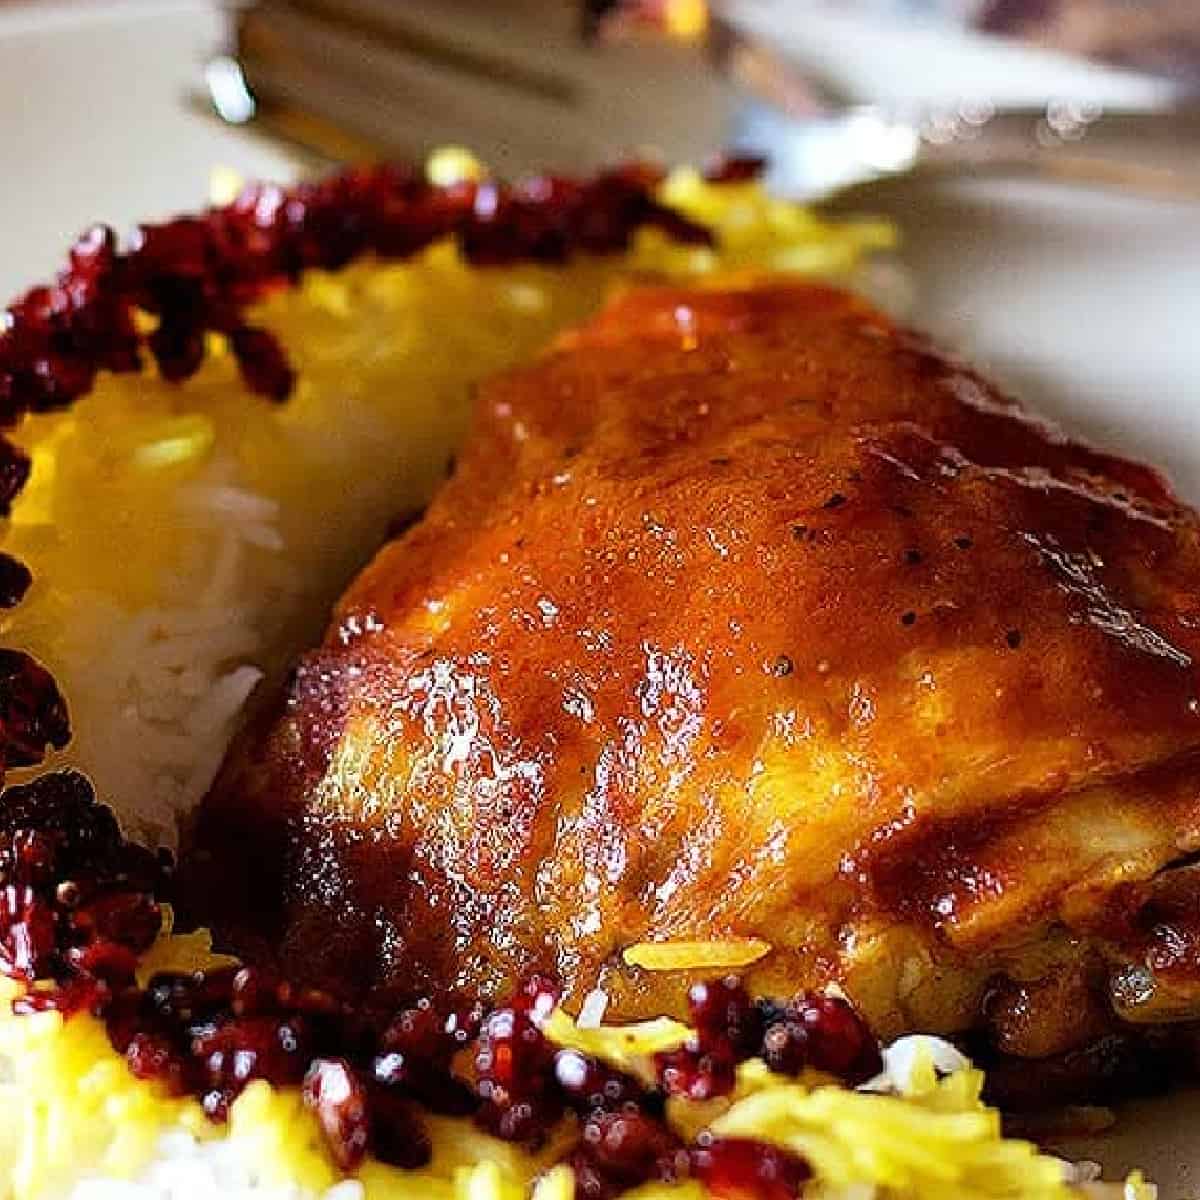 Zereshk polo morgh is one of the most famous dishes in Persian cuisine. It's full of wonderful flavors such as saffron, turmeric and barberry.
